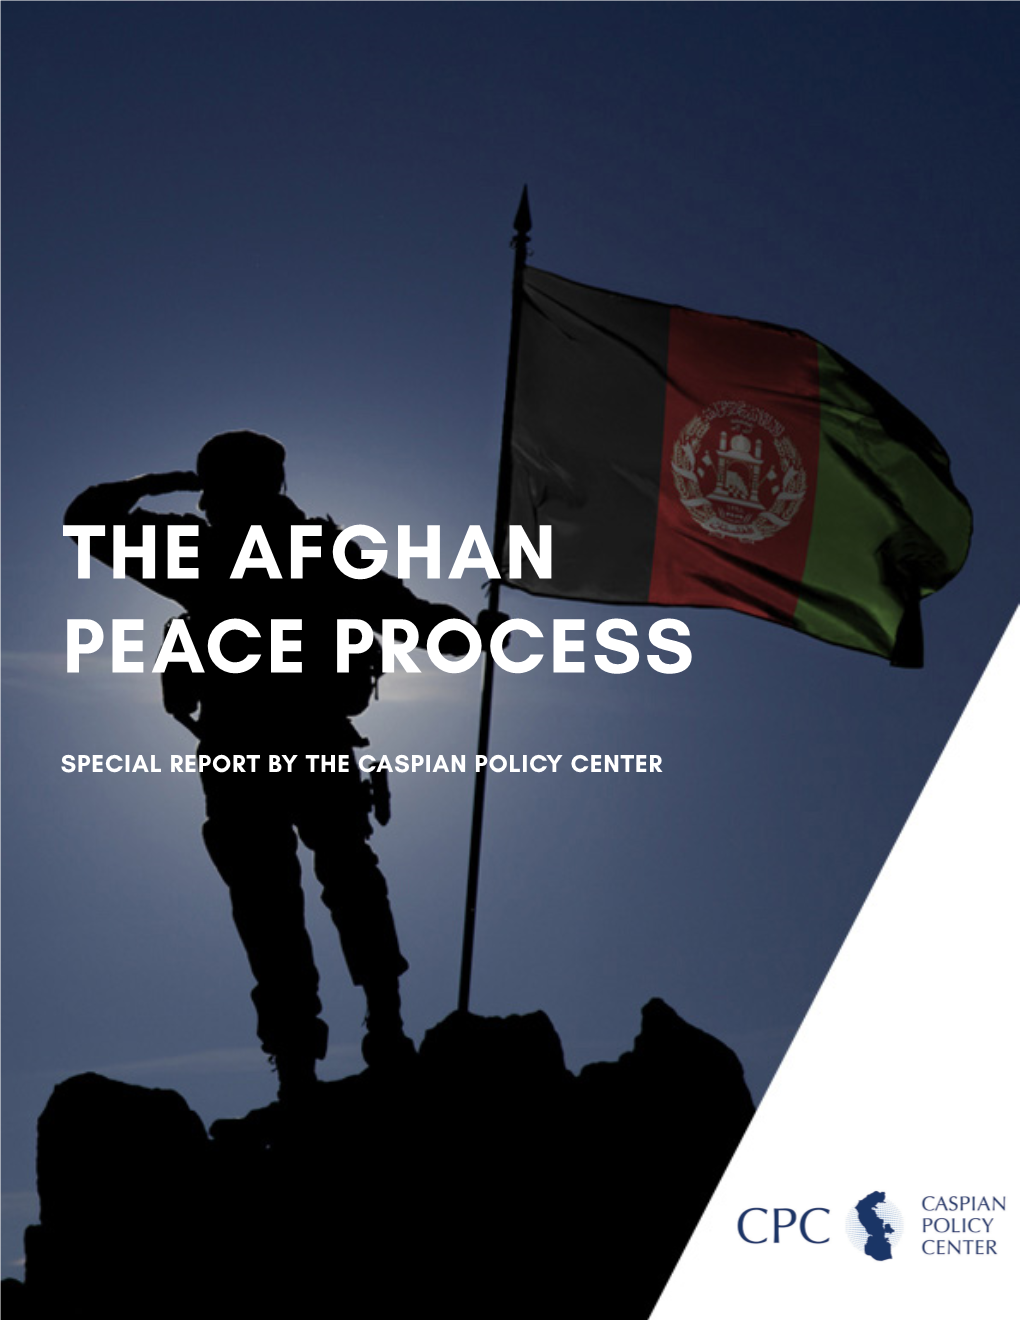 The Afghan Peace Process